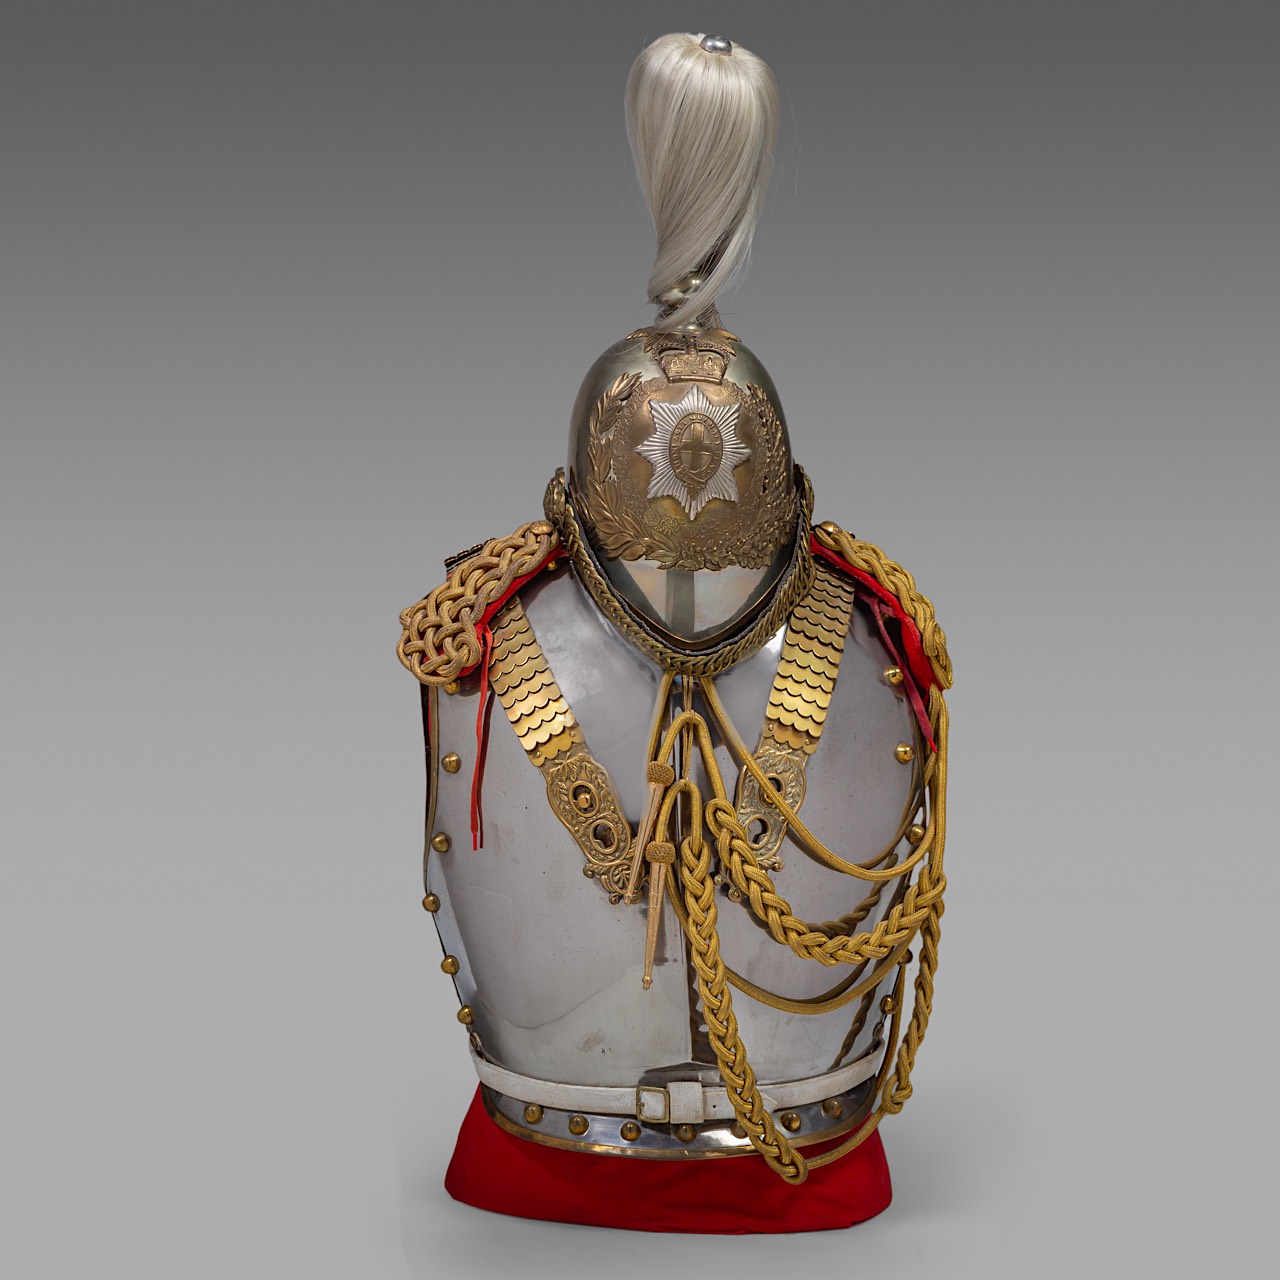 cuirass and helmet of the Royal Horse guards, metal and brass,1952 (Eliabeth II) 88 x 36 x 44 cm. (3 - Image 2 of 6